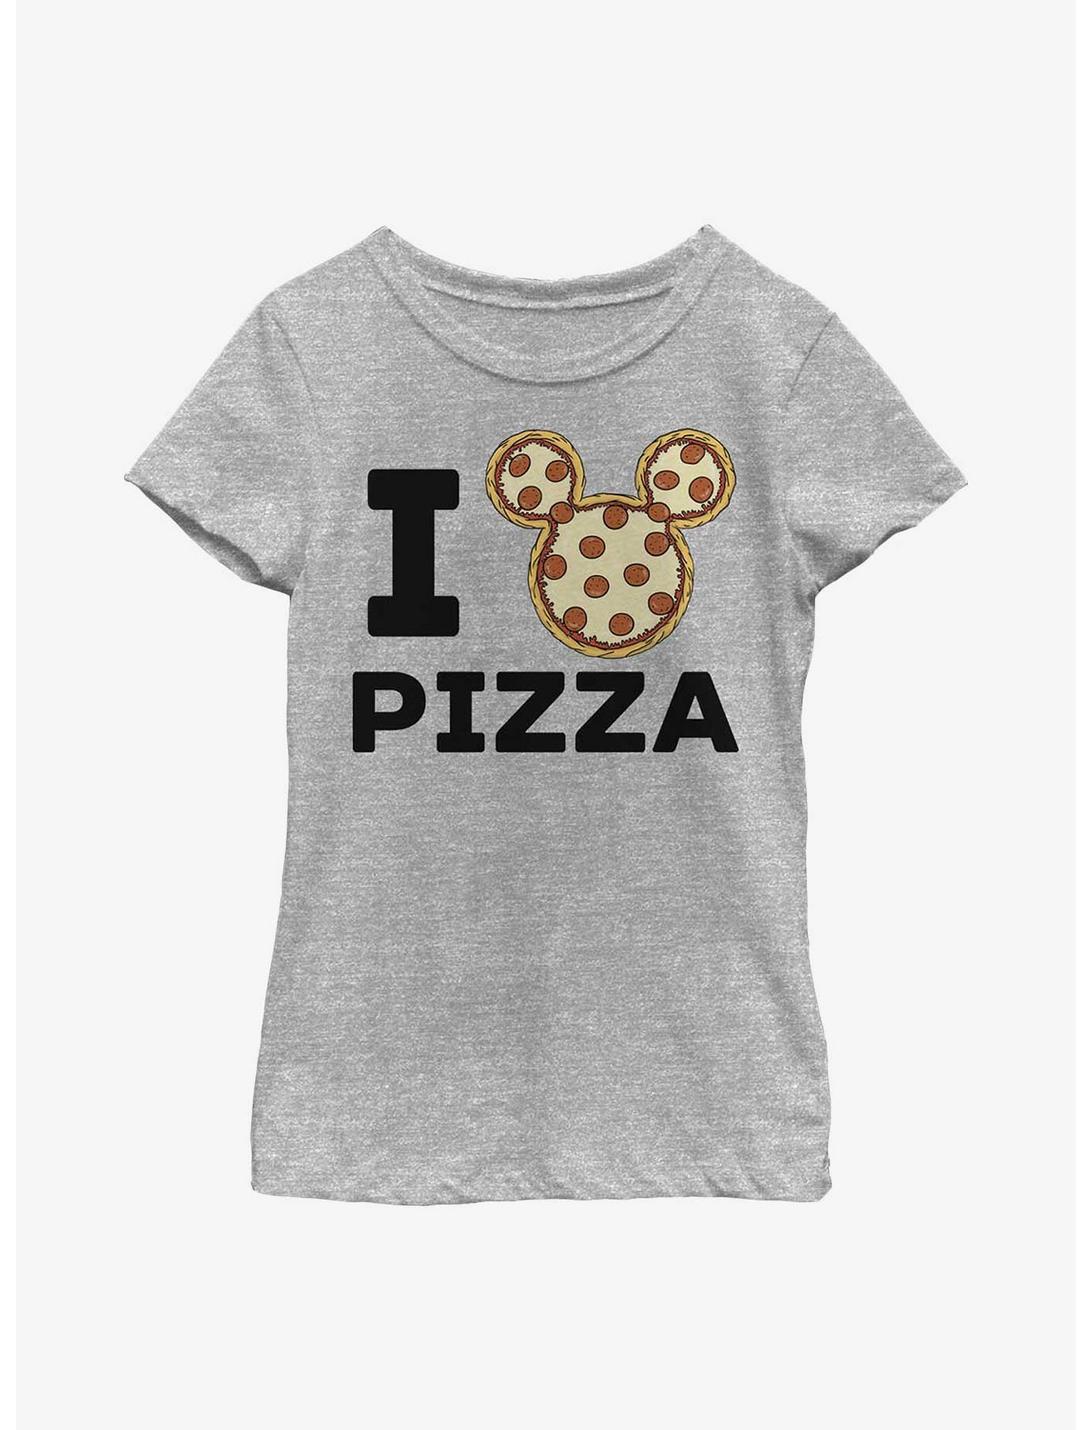 Disney Mickey Mouse Mickey Pizza Youth Girls T-Shirt, ATH HTR, hi-res